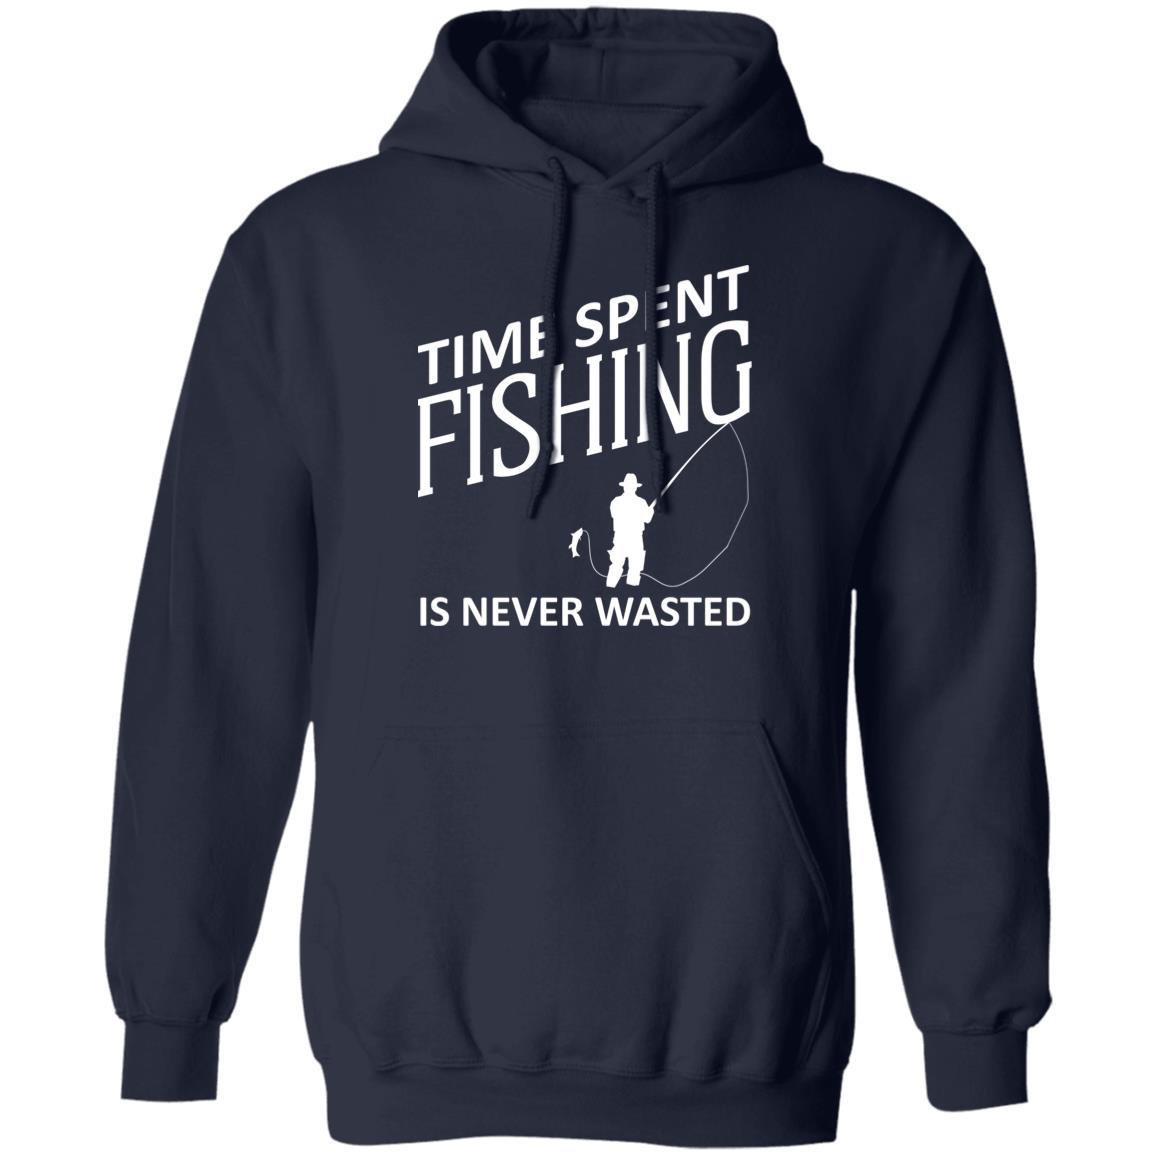 Time spent fishing pullover hoodie navy-w